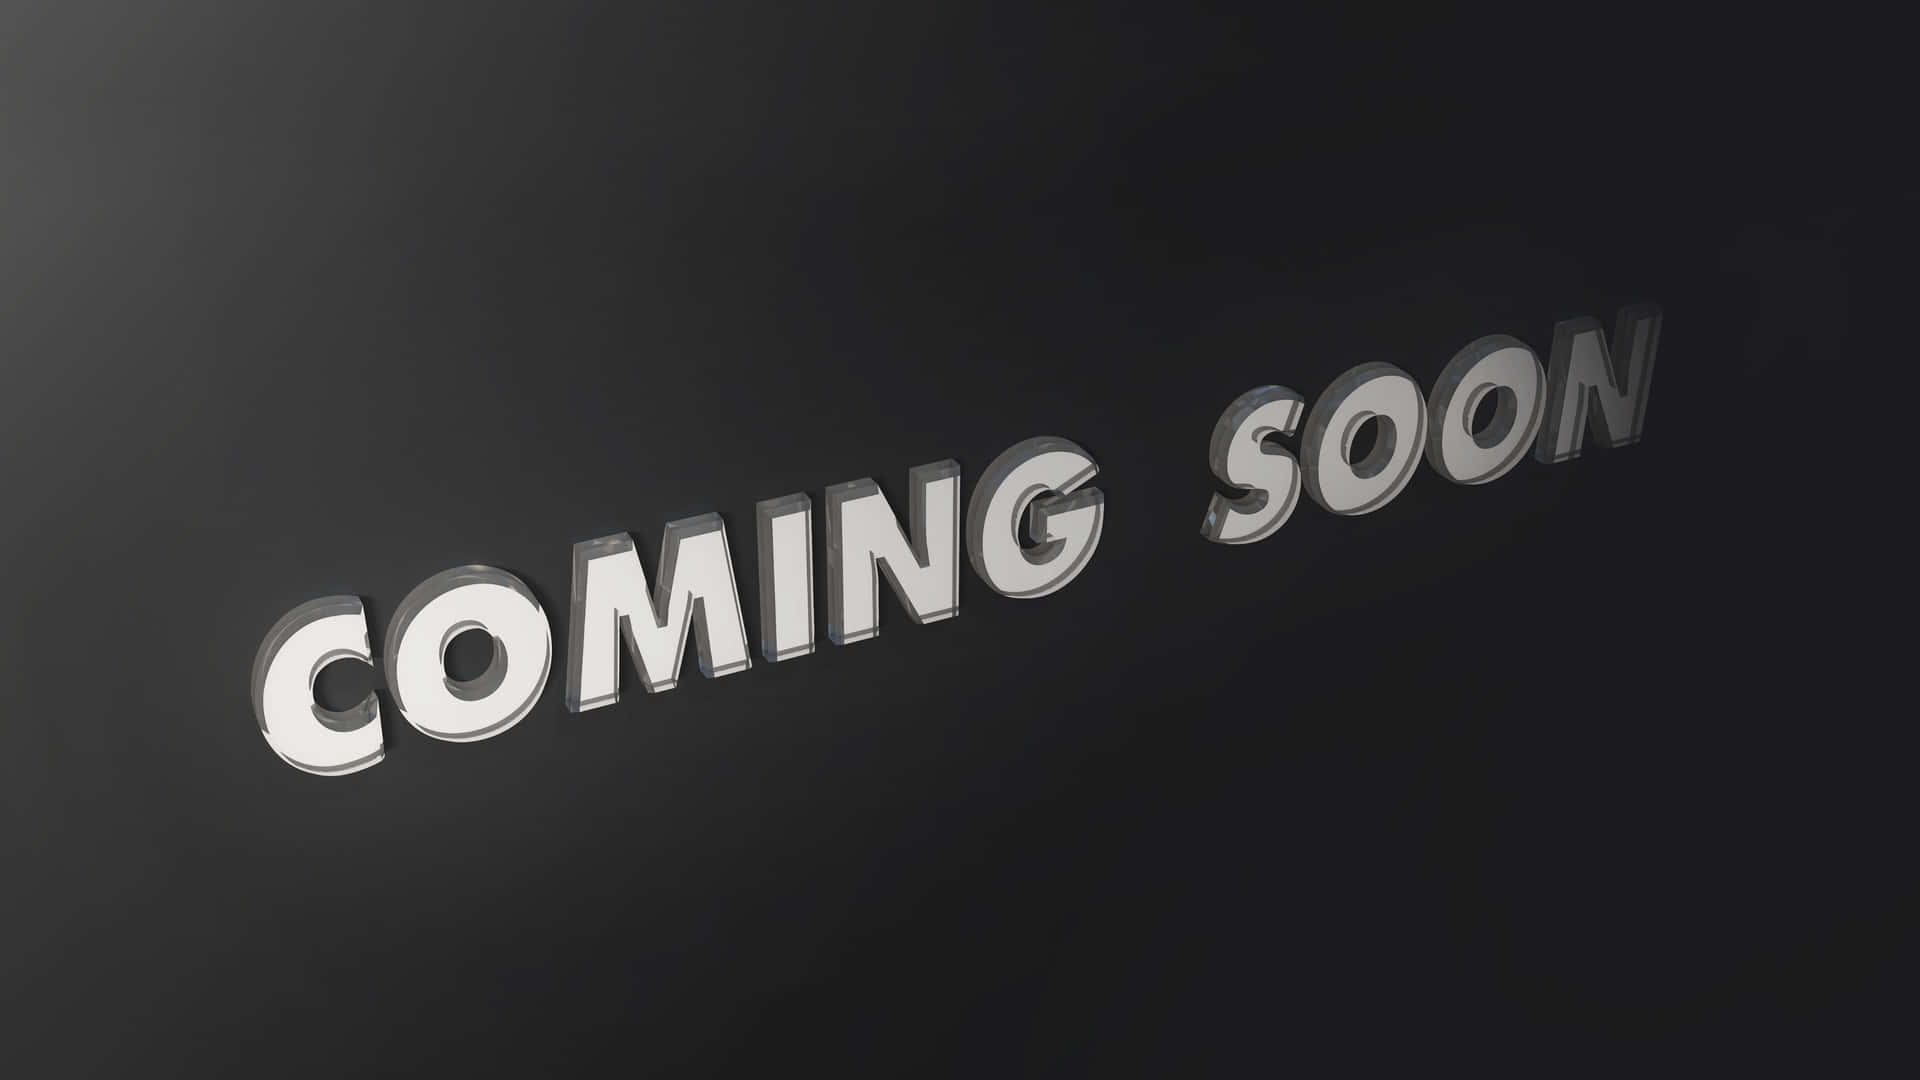 "Coming Soon: Exciting Future Ahead"